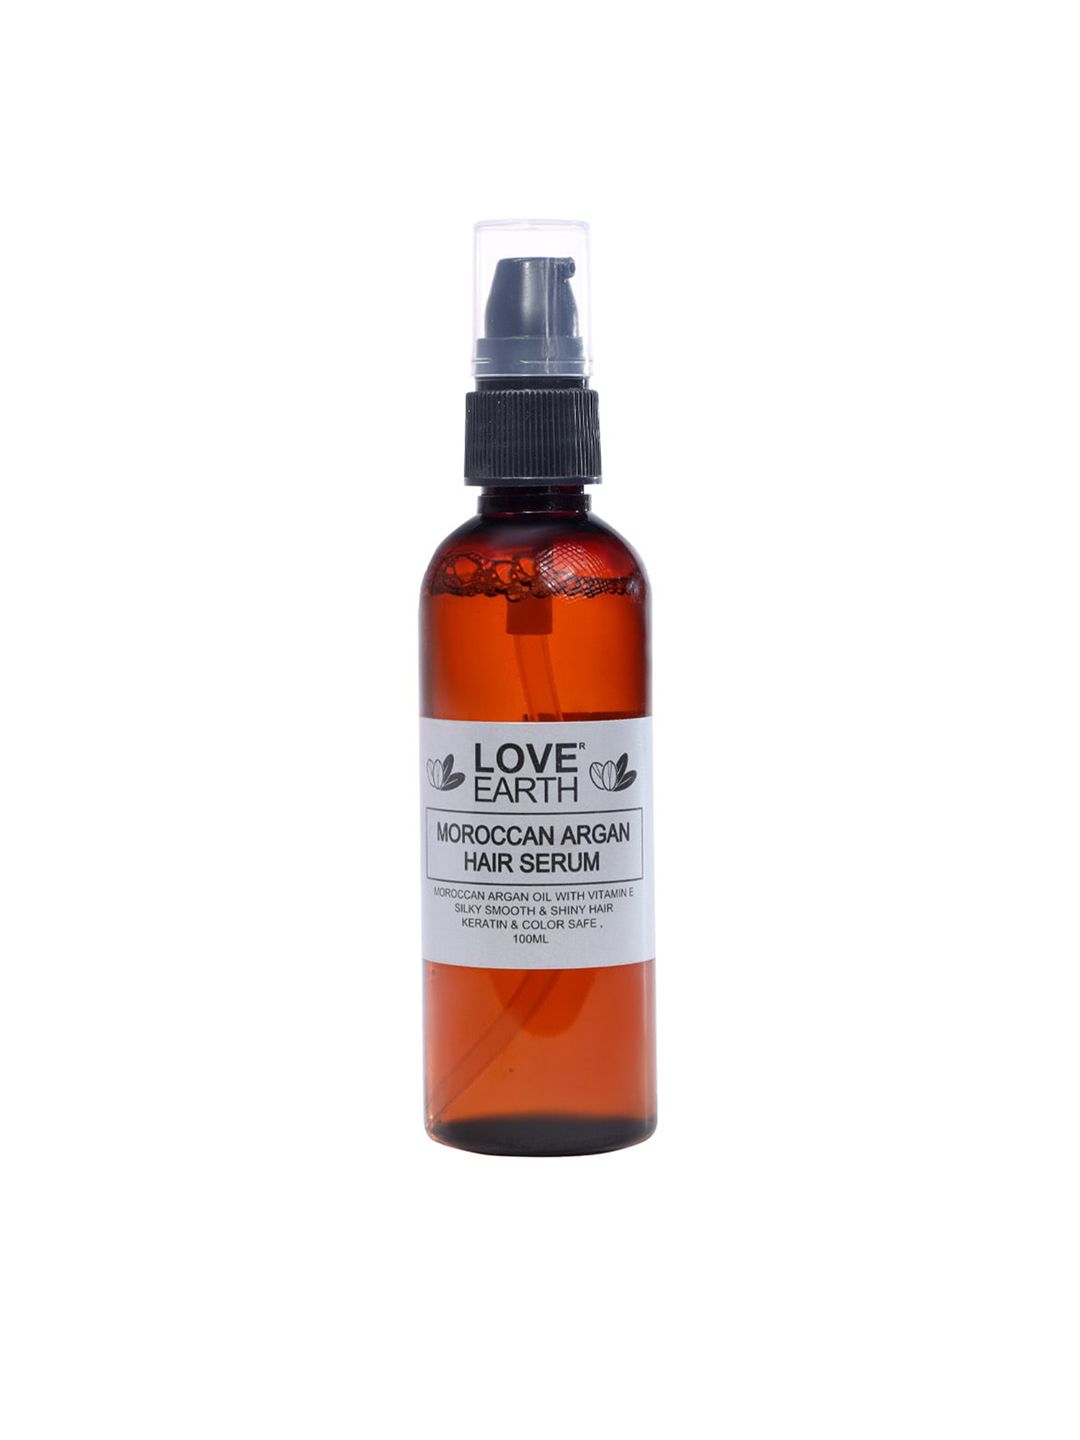 LOVE EARTH Moroccan Argan Hair Serum with Vitamin E for Silky Smooth & Shiny Hair - 100ml Price in India